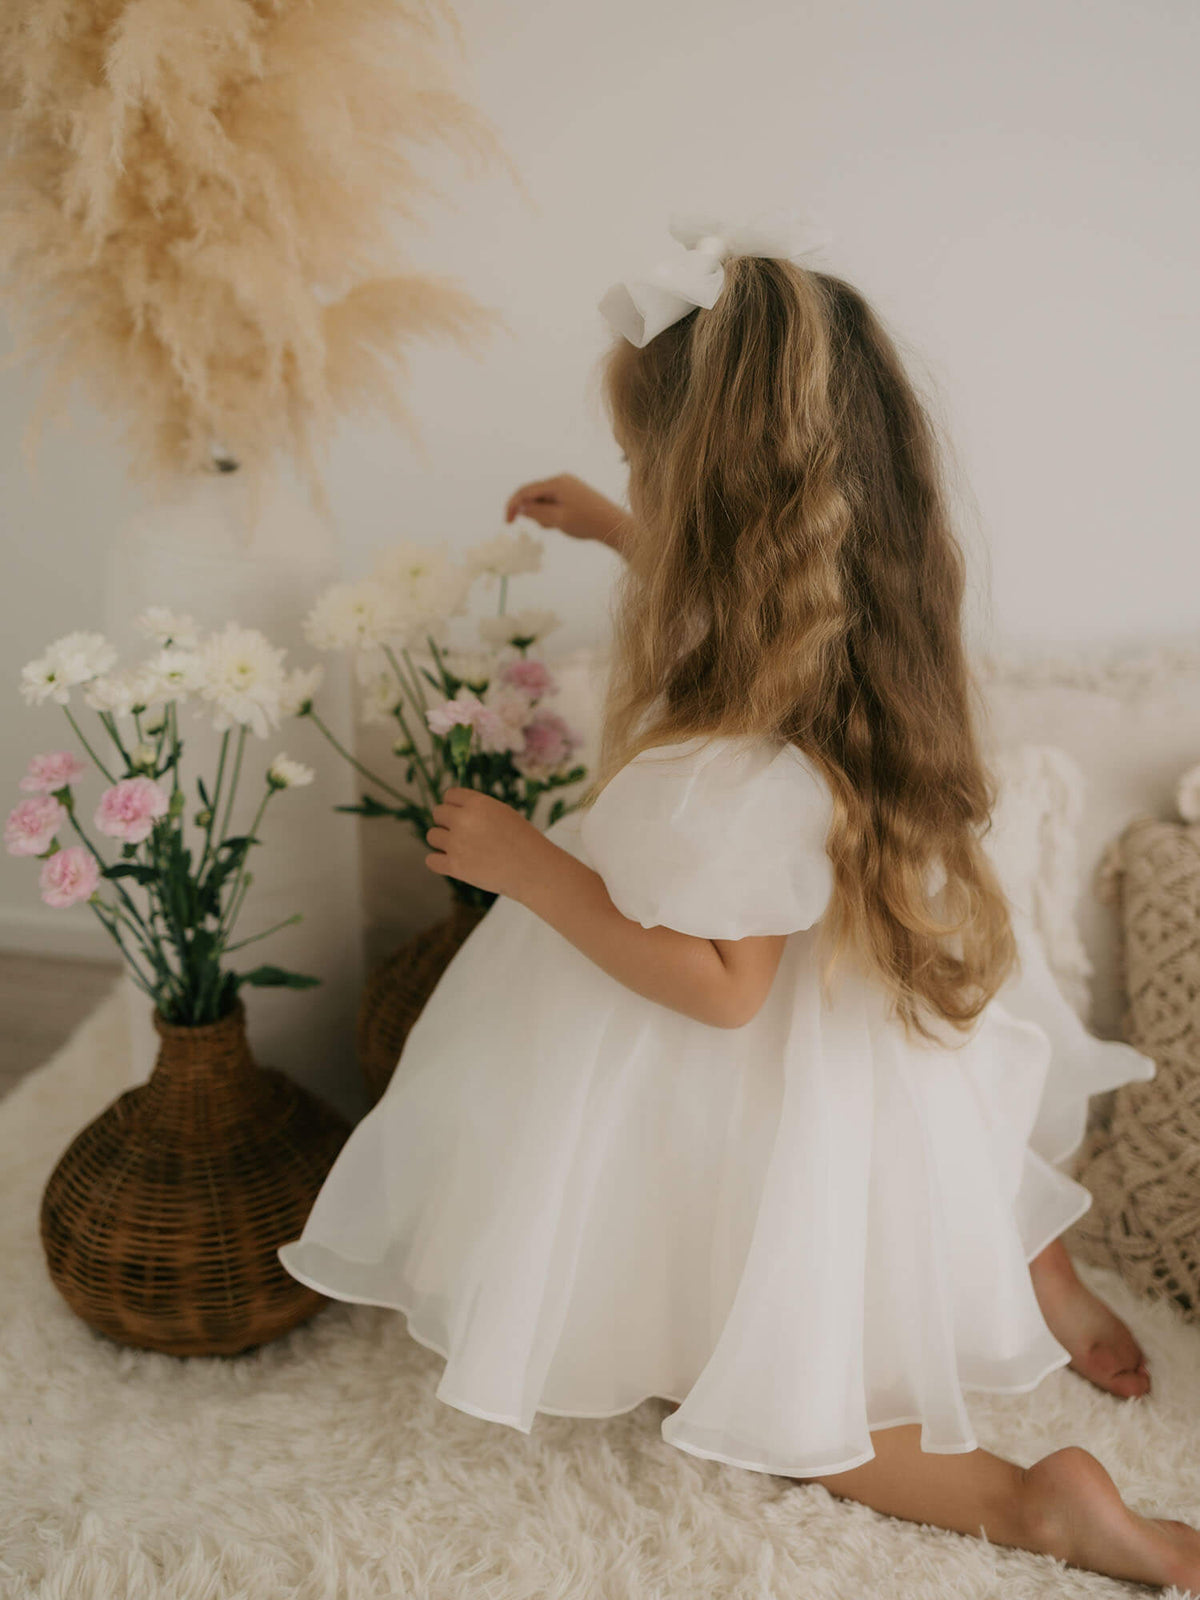 Cleo flower girl dress, showing the organza puff sleeves and puff skirt with built in petticoat.